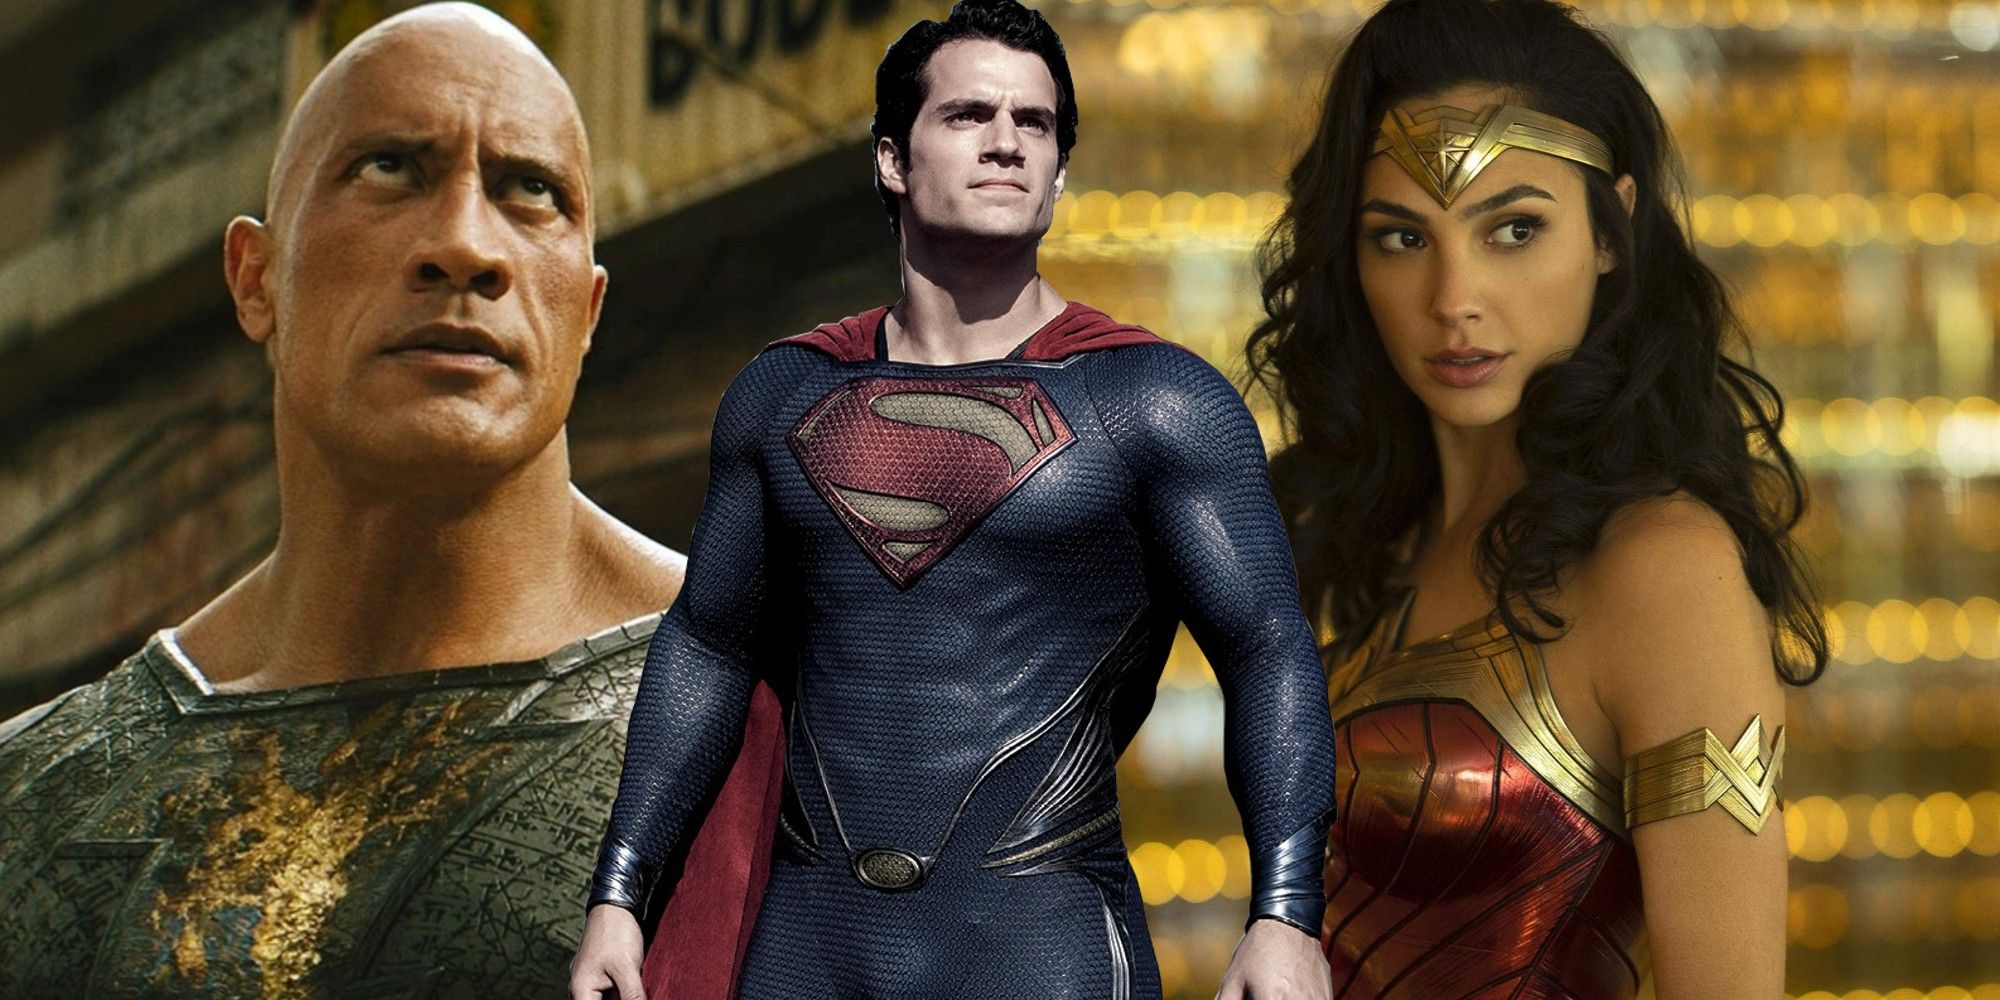 10 Most Divisive DCEU Movies, According to Rotten Tomatoes